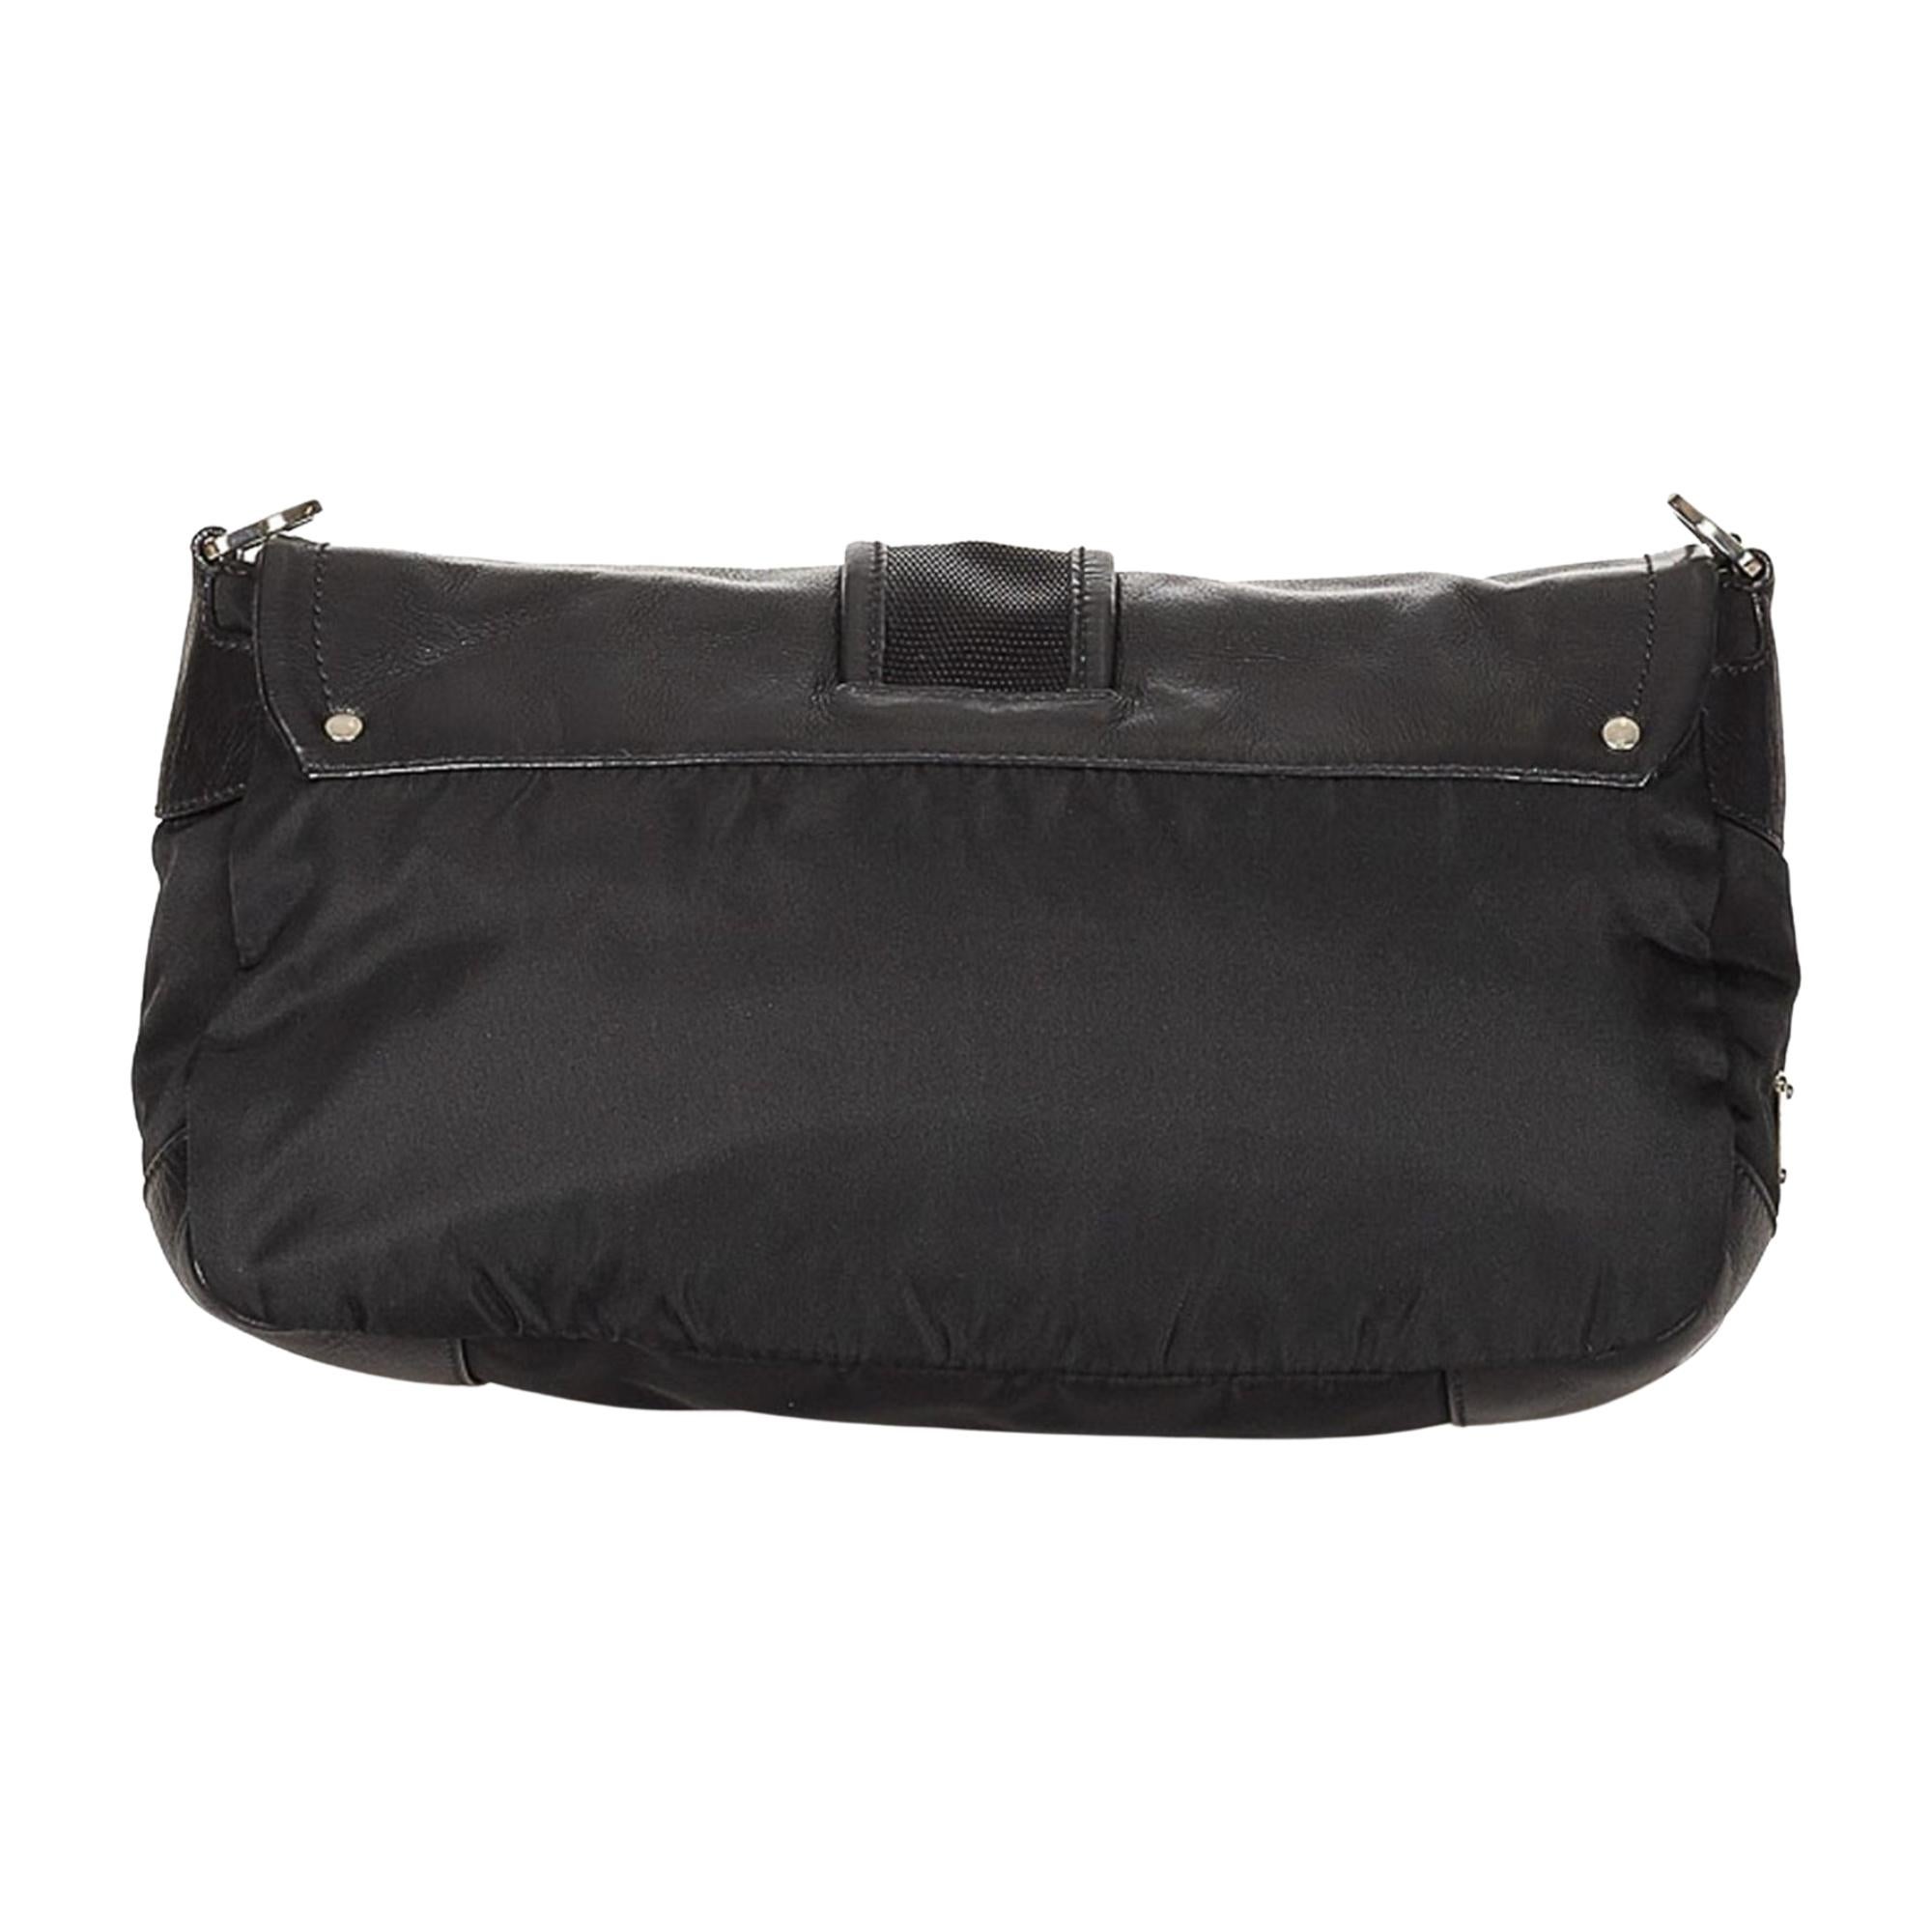 This bag features a black nylon body with leather trim and details with a front buckle to secure the top flap with magnetic snap closure. The bag is finished with top zip closure, 2 zip compartments at the from and logo jacquard black woven fabric